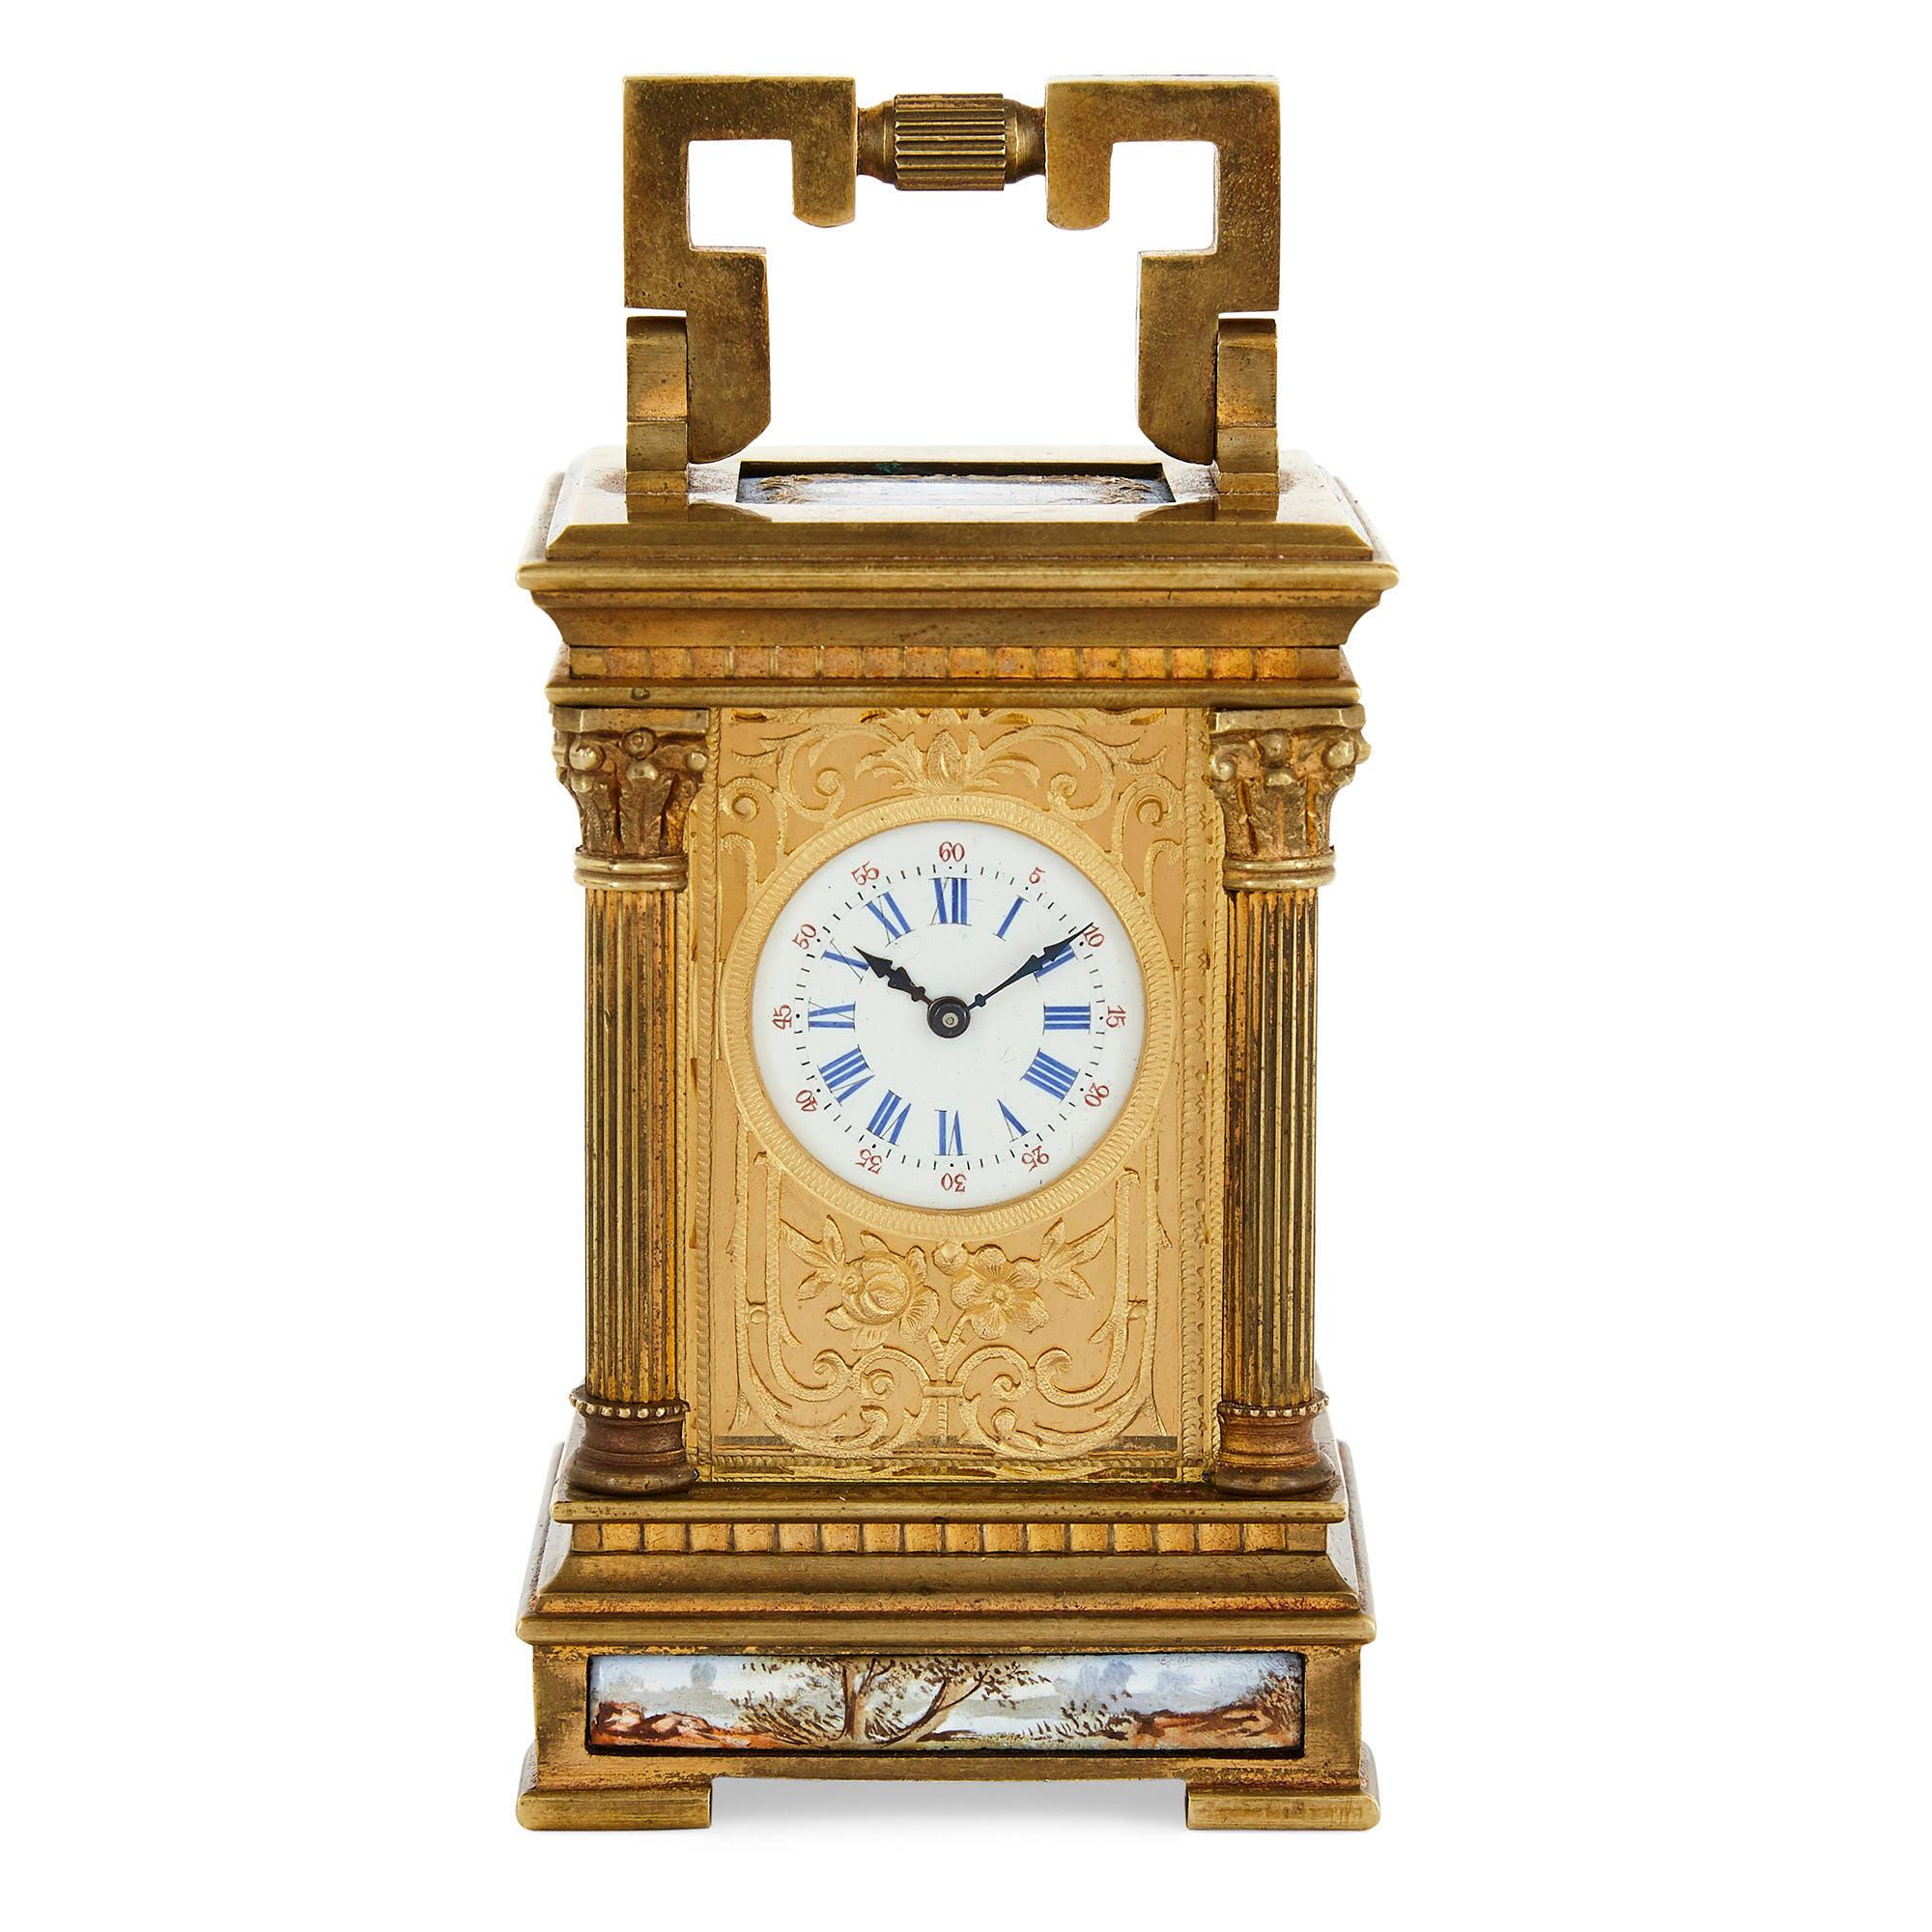 Antique French gilt bronze and enamel miniature carriage clock
French, late 19th Century
Clock: Height 11cm, width 5.5cm, depth 5cm
Case: Height 11cm, width 7cm, depth 7cm

This small and elegant gilt bronze carriage clock is crafted in the